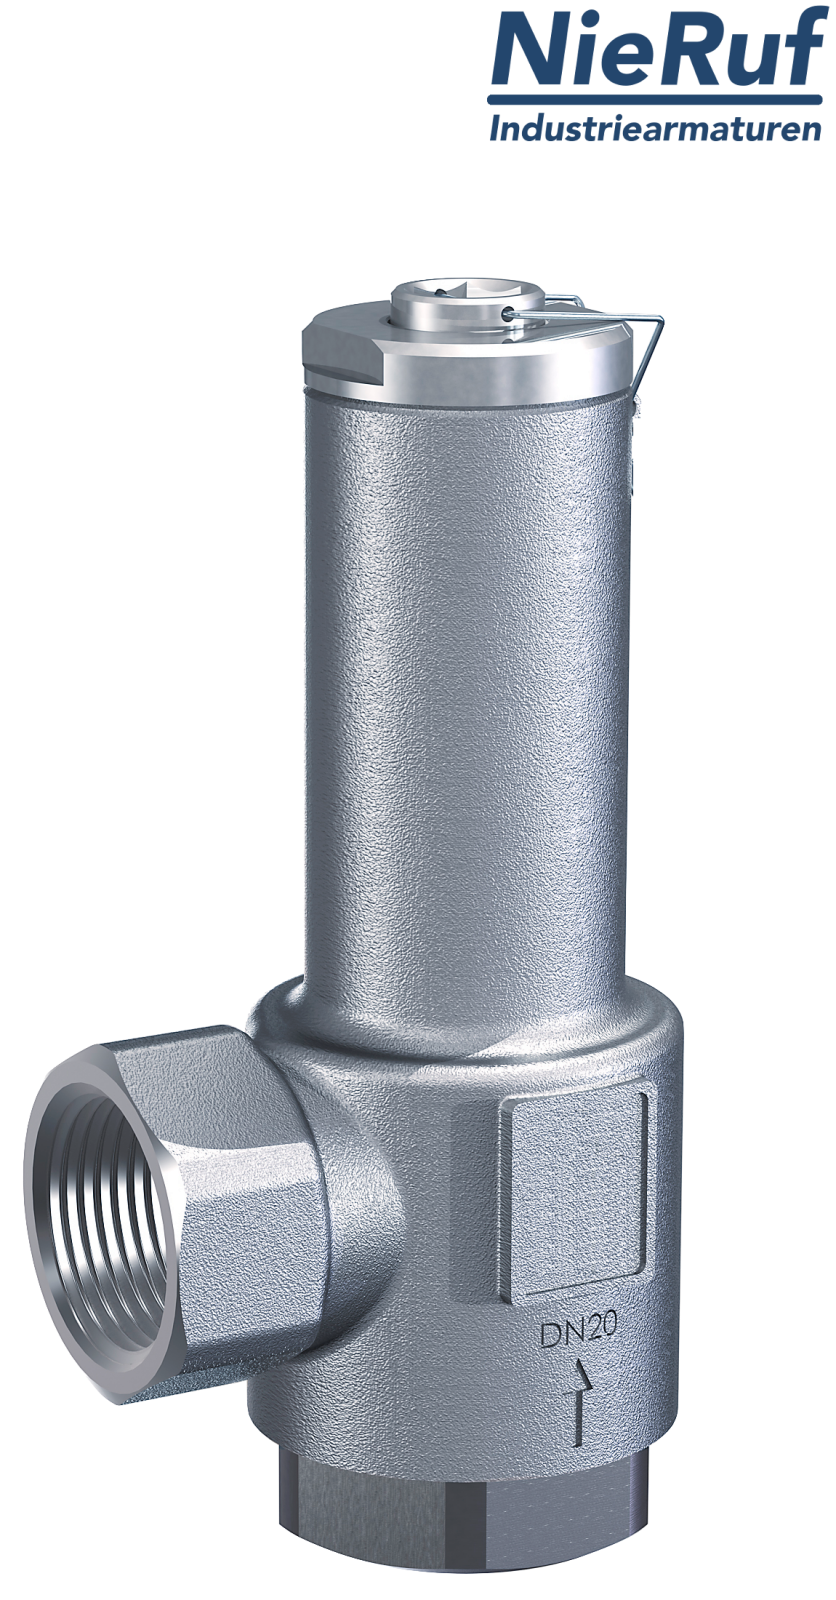 angle-type overflow valve 3/8" inch fm UV03 stainless steel AISI 316L 0,5 - 2,5 bar